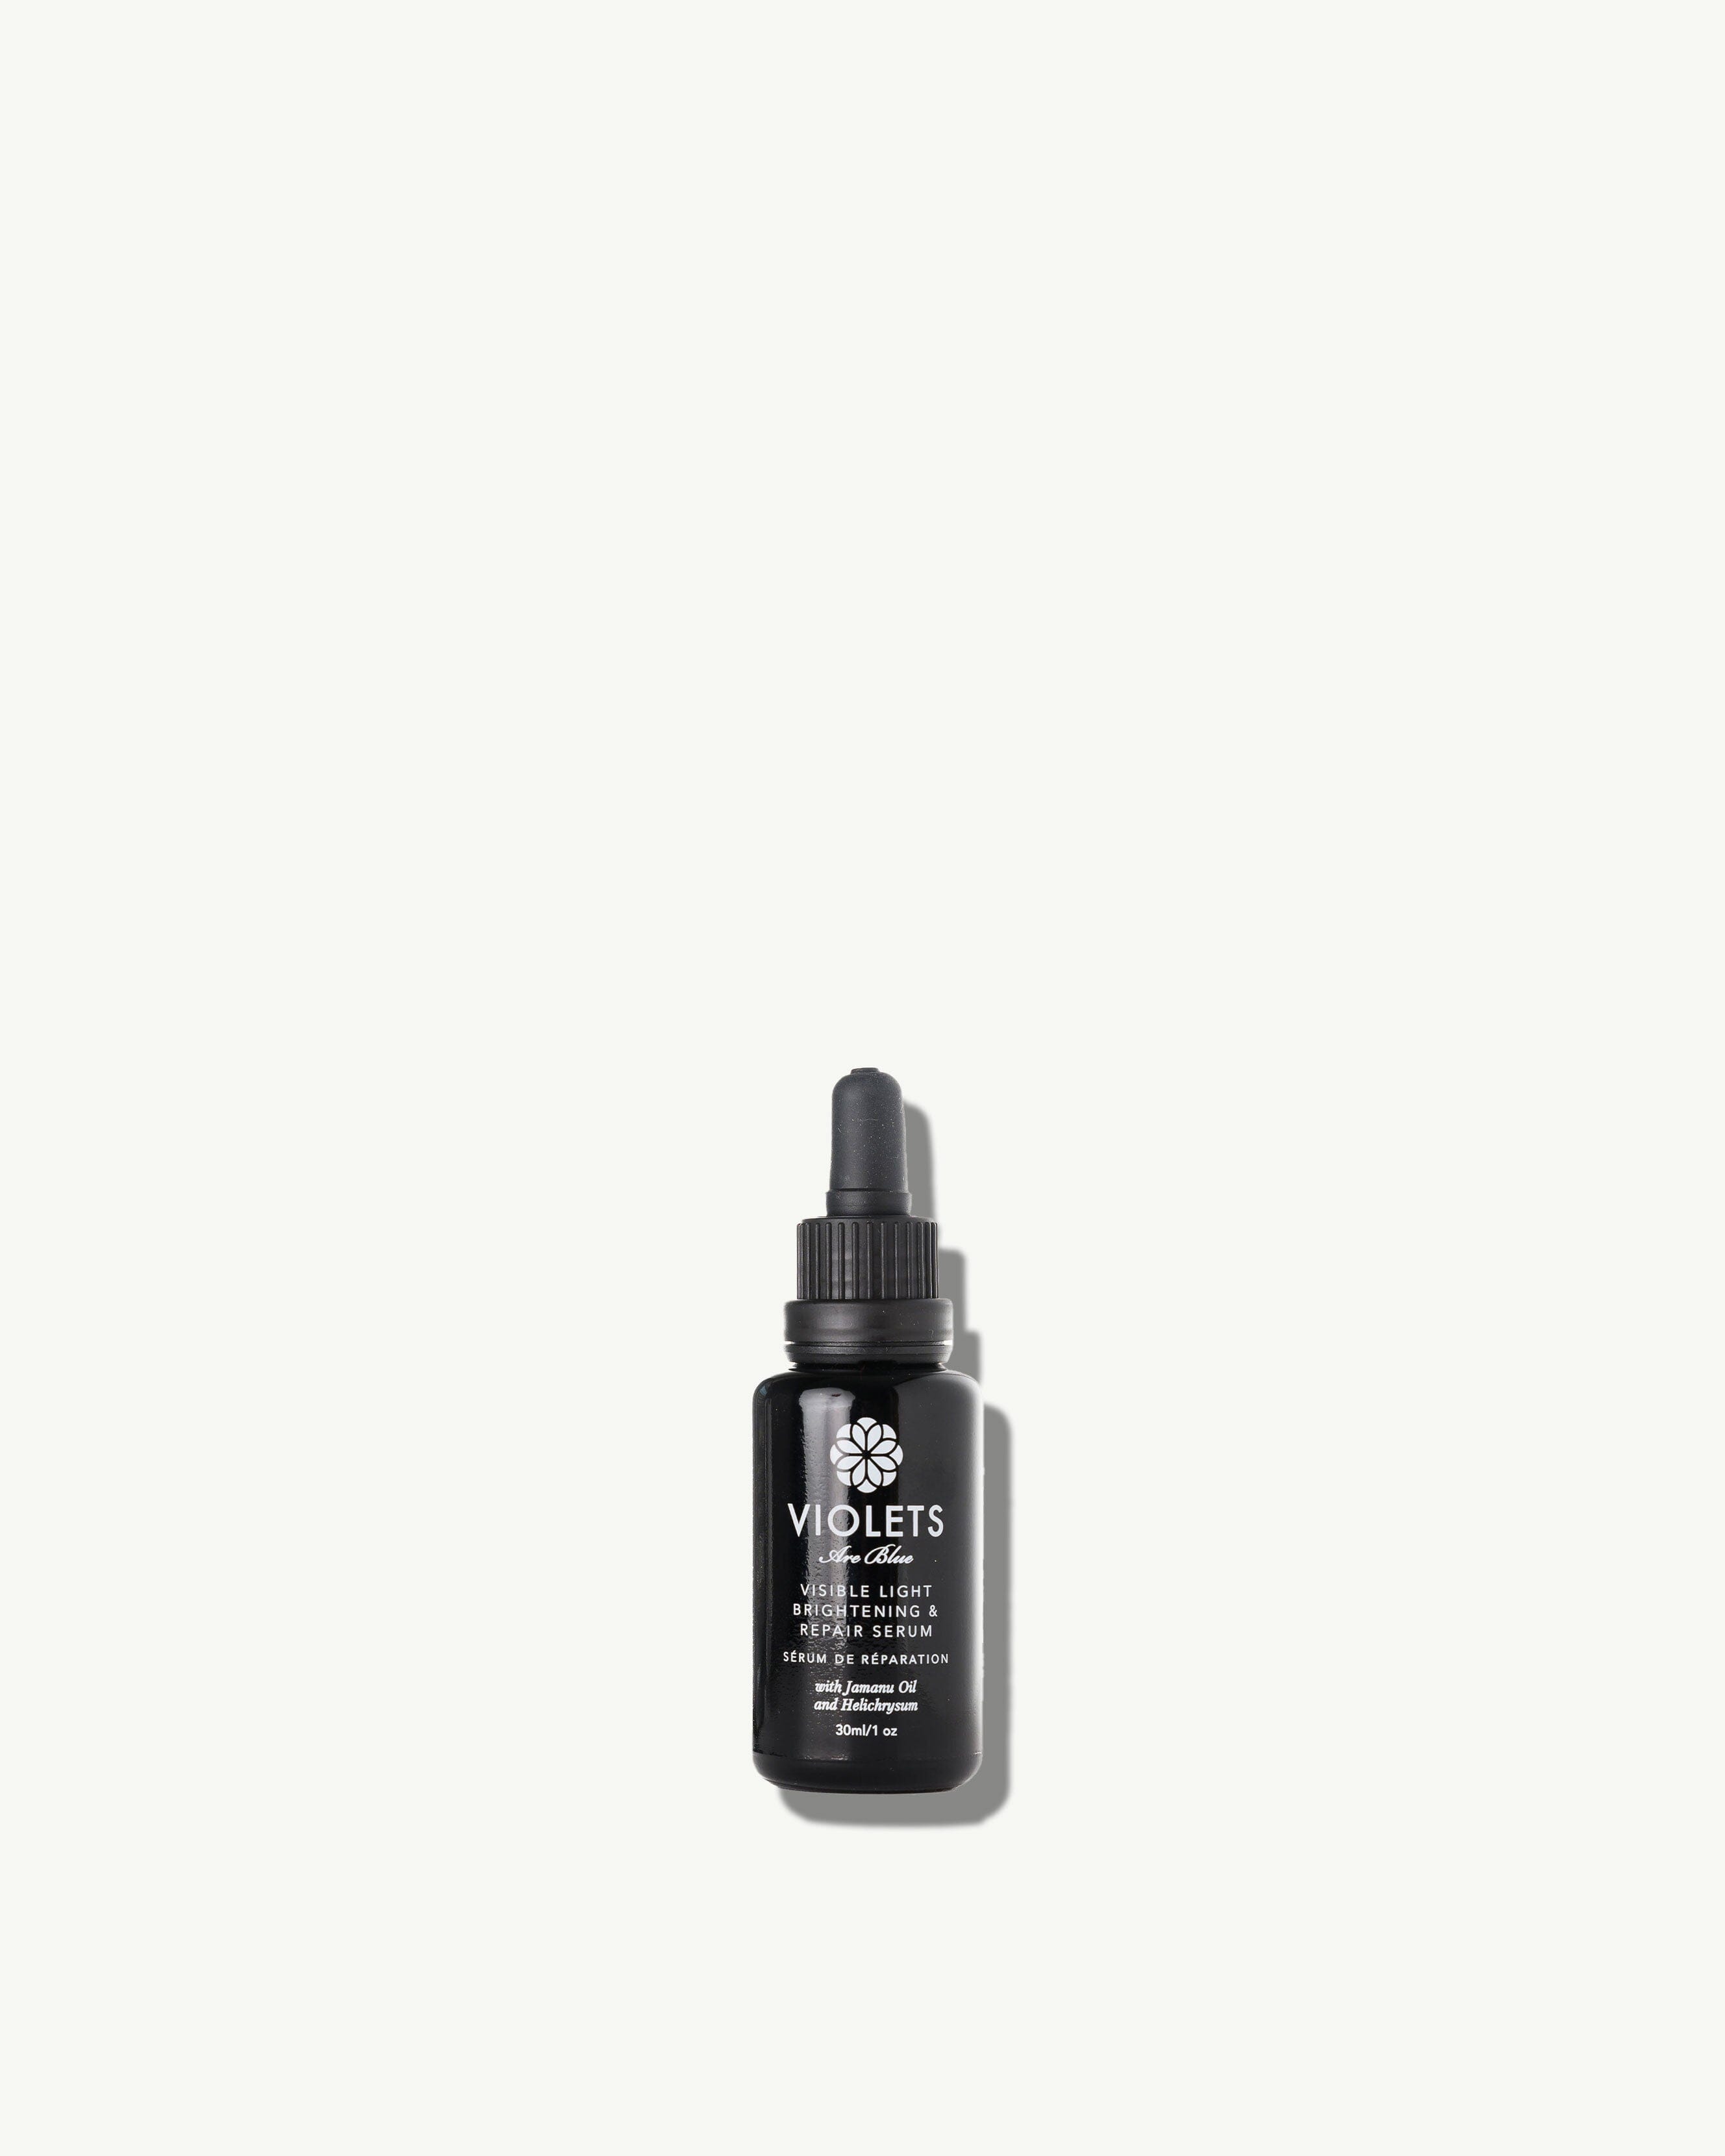 Visible Light Brightening and Repair Serum with Tamanu and Helichrysum